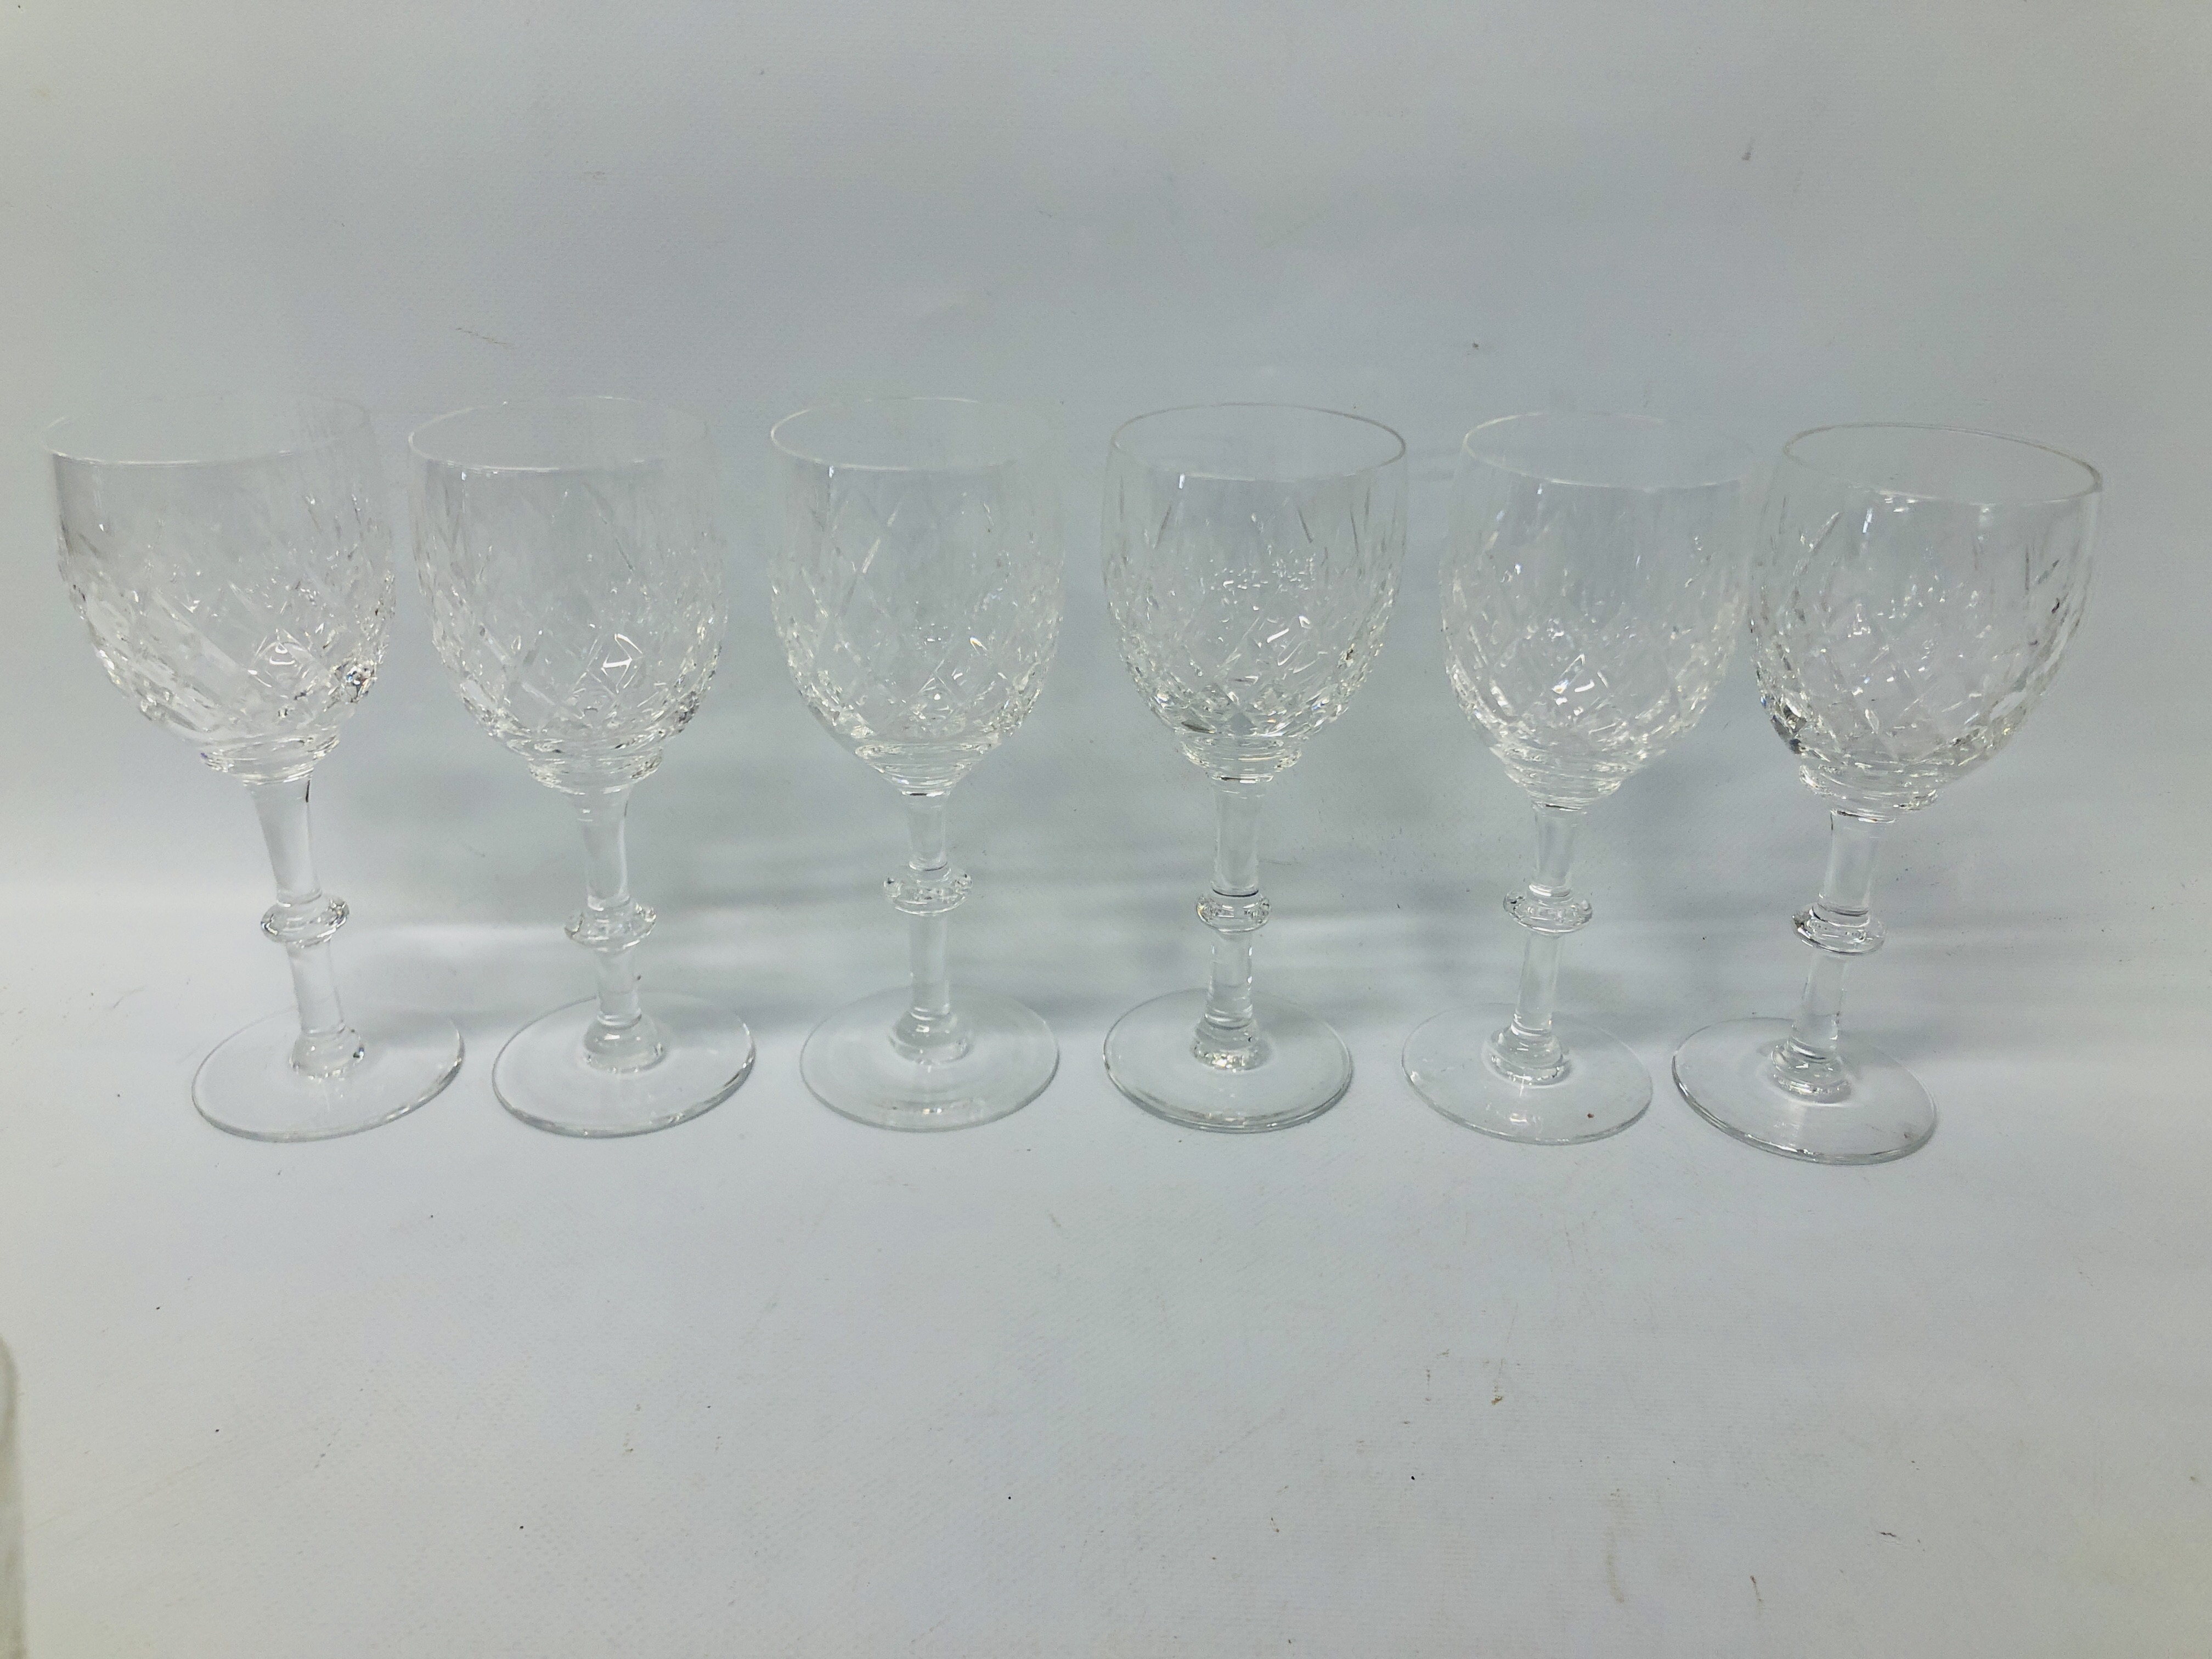 COLLECTION OF GOOD QUALITY CUT GLASS CRYSTAL DRINKING VESSELS ALONG WITH A SET OF 4 HAND PAINTED - Image 5 of 11